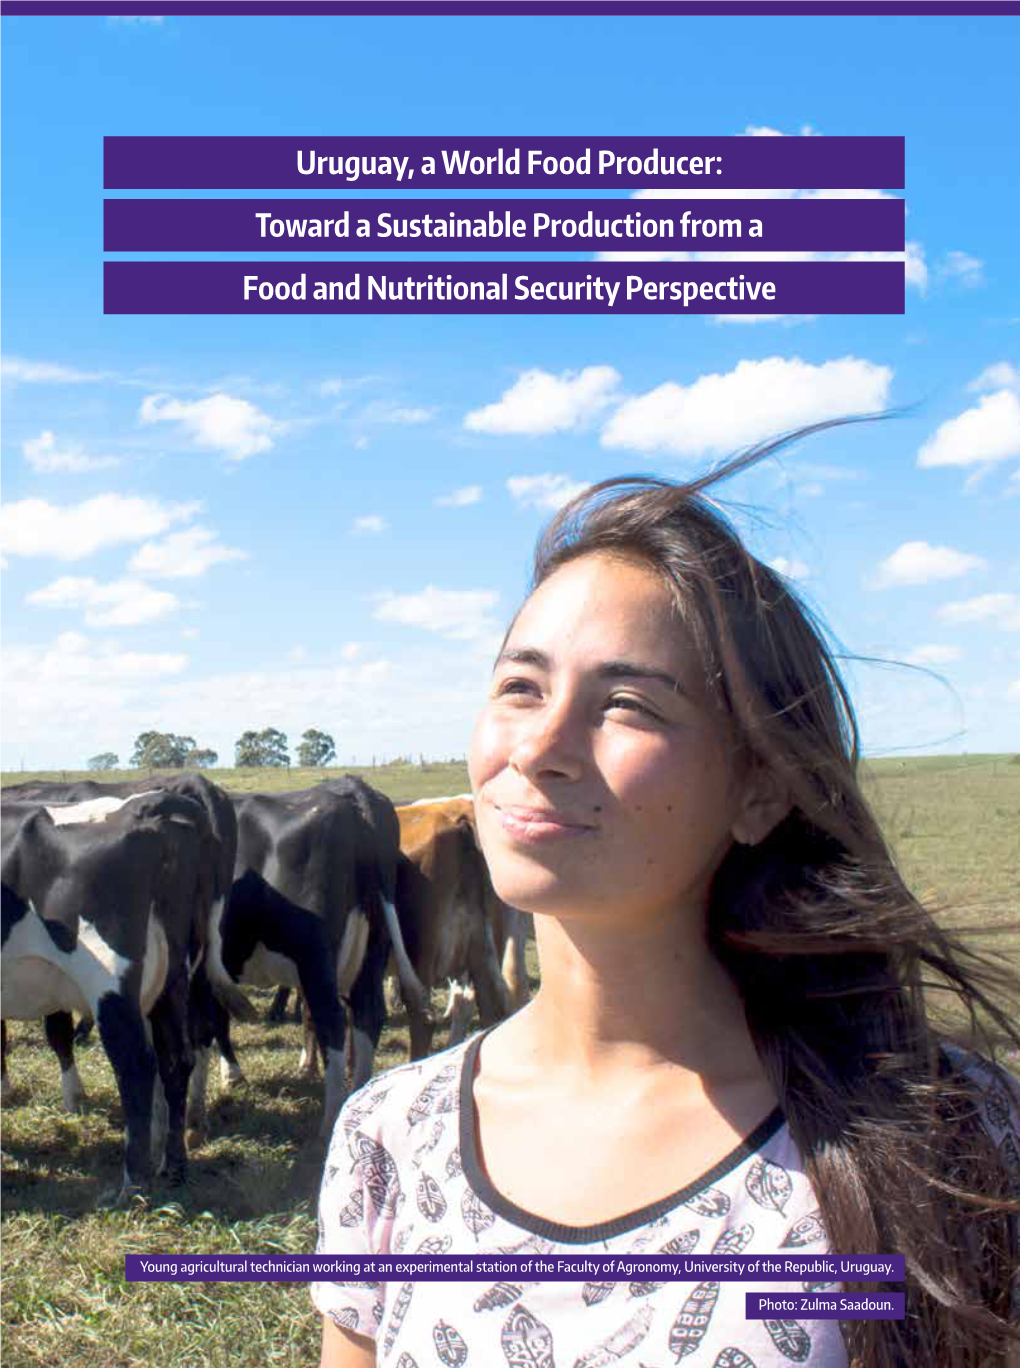 Uruguay, a World Food Producer: Toward a Sustainable Production from a Food and Nutritional Security Perspective